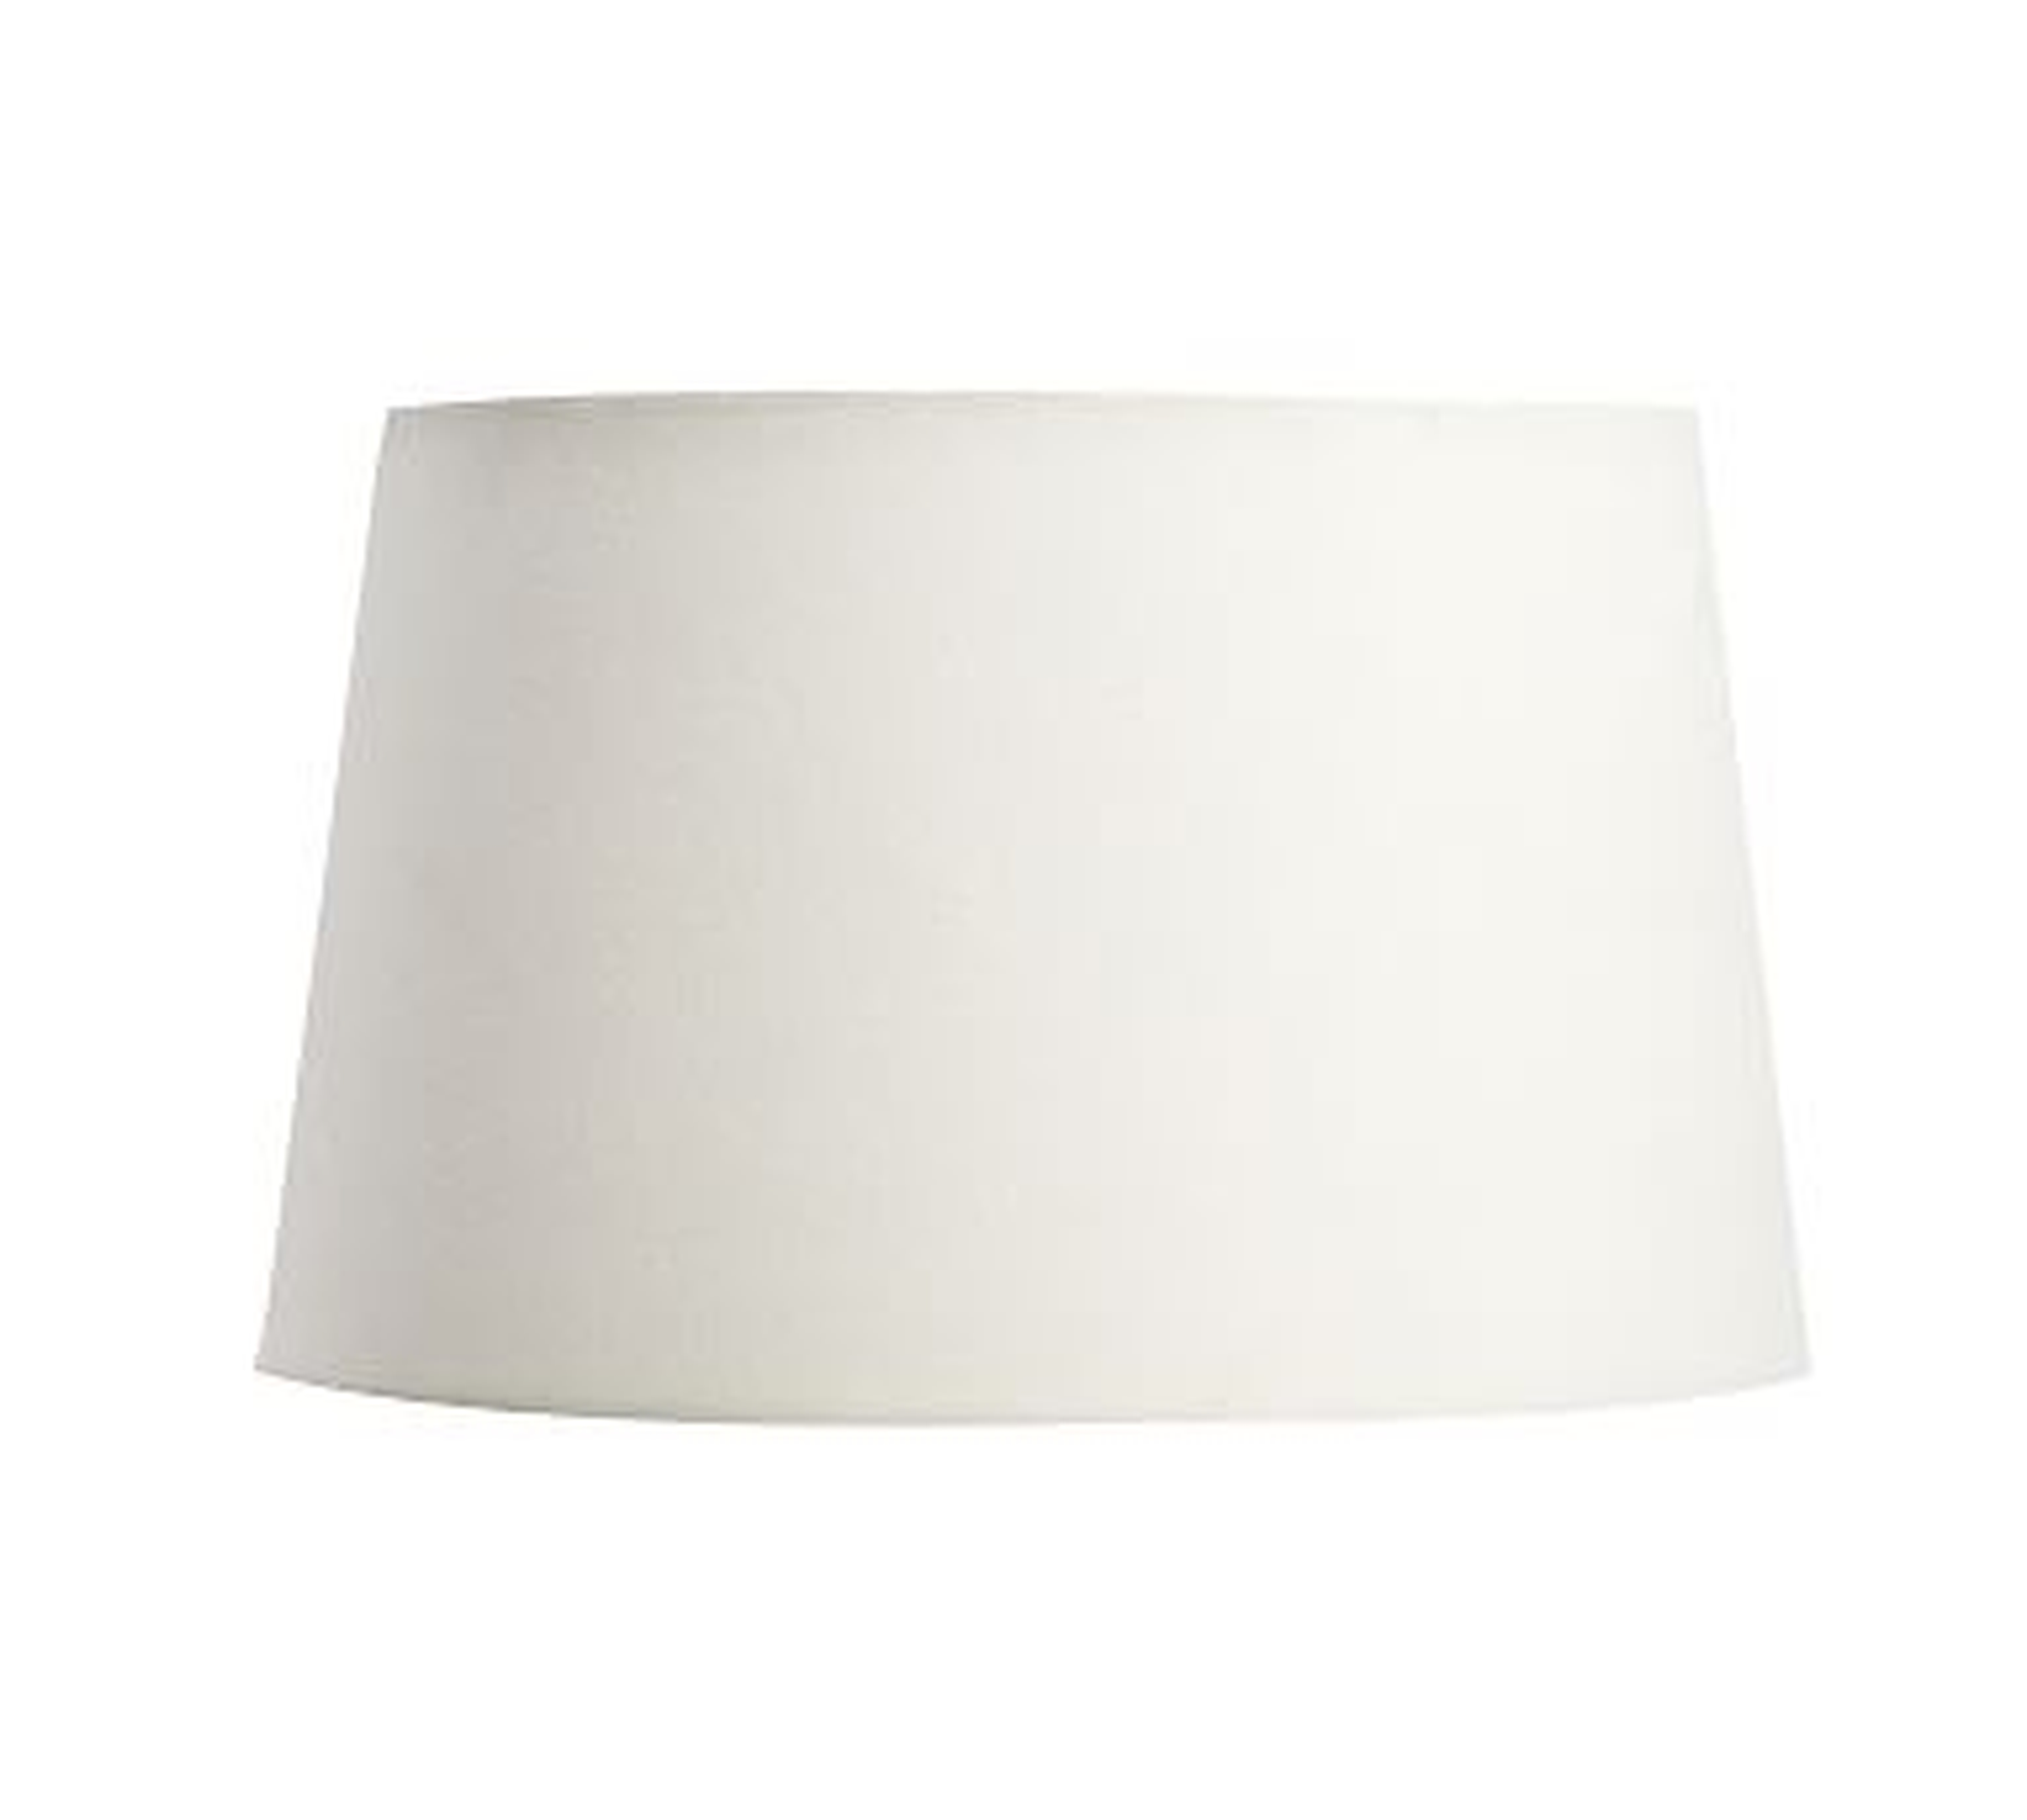 Gallery Tapered Linen Drum Shade, Small, White - Pottery Barn